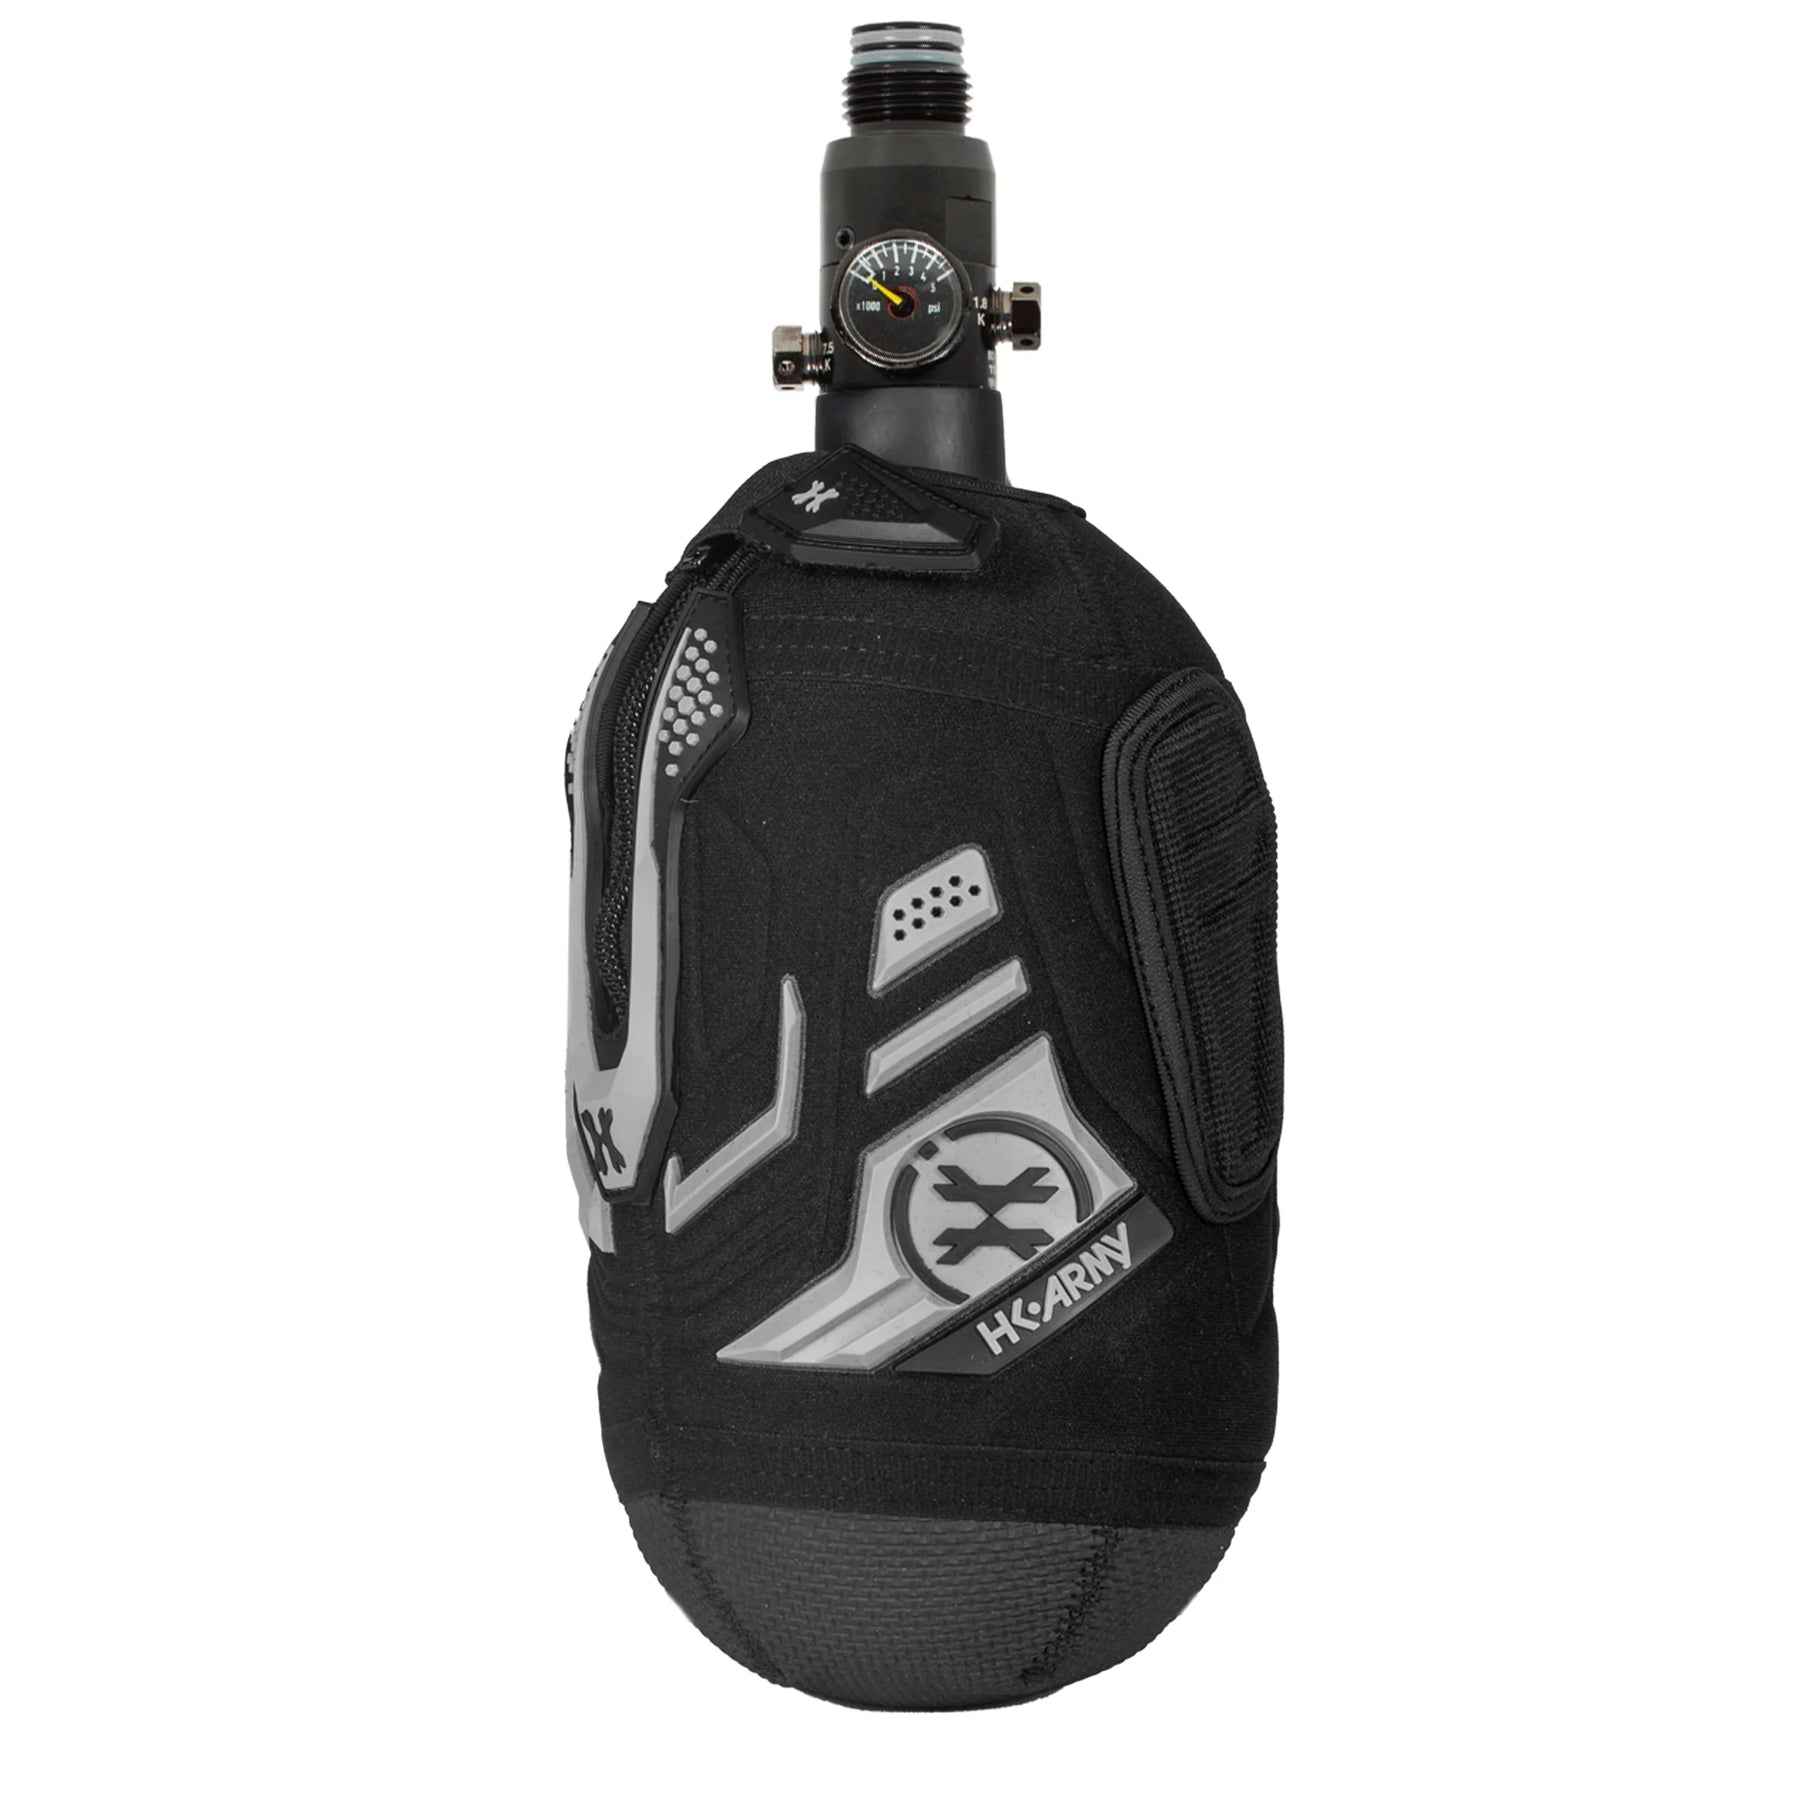 Paintball air tank cover / sleeve | hardline armored - Color: grey/black - graphite